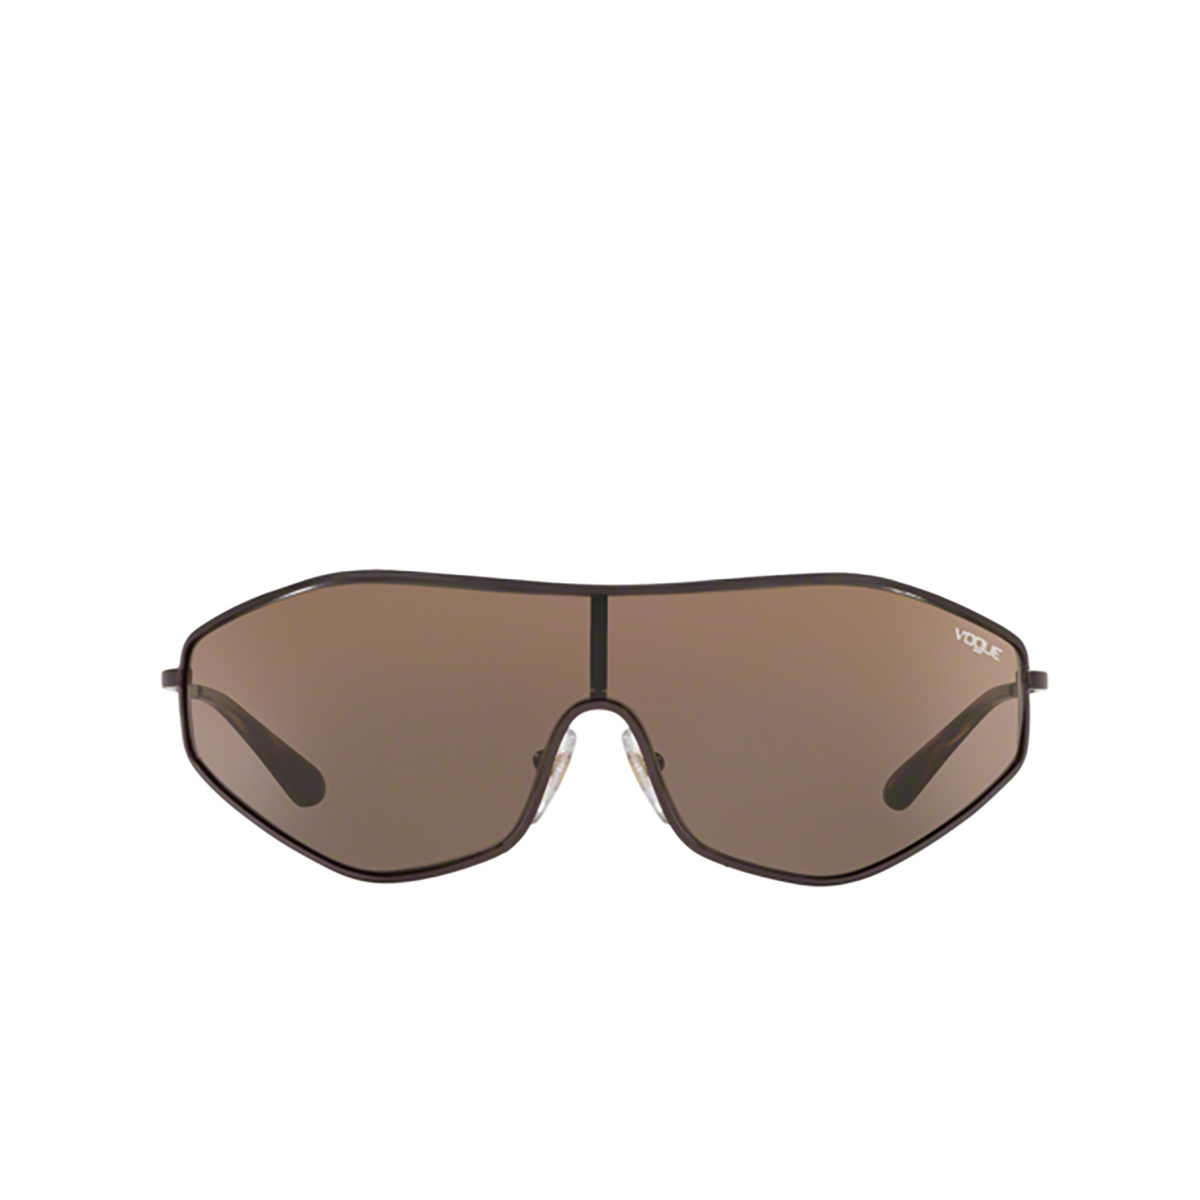 Vogue® Mask Sunglasses: G-vision VO4137S color Brown 997/73 - front view.